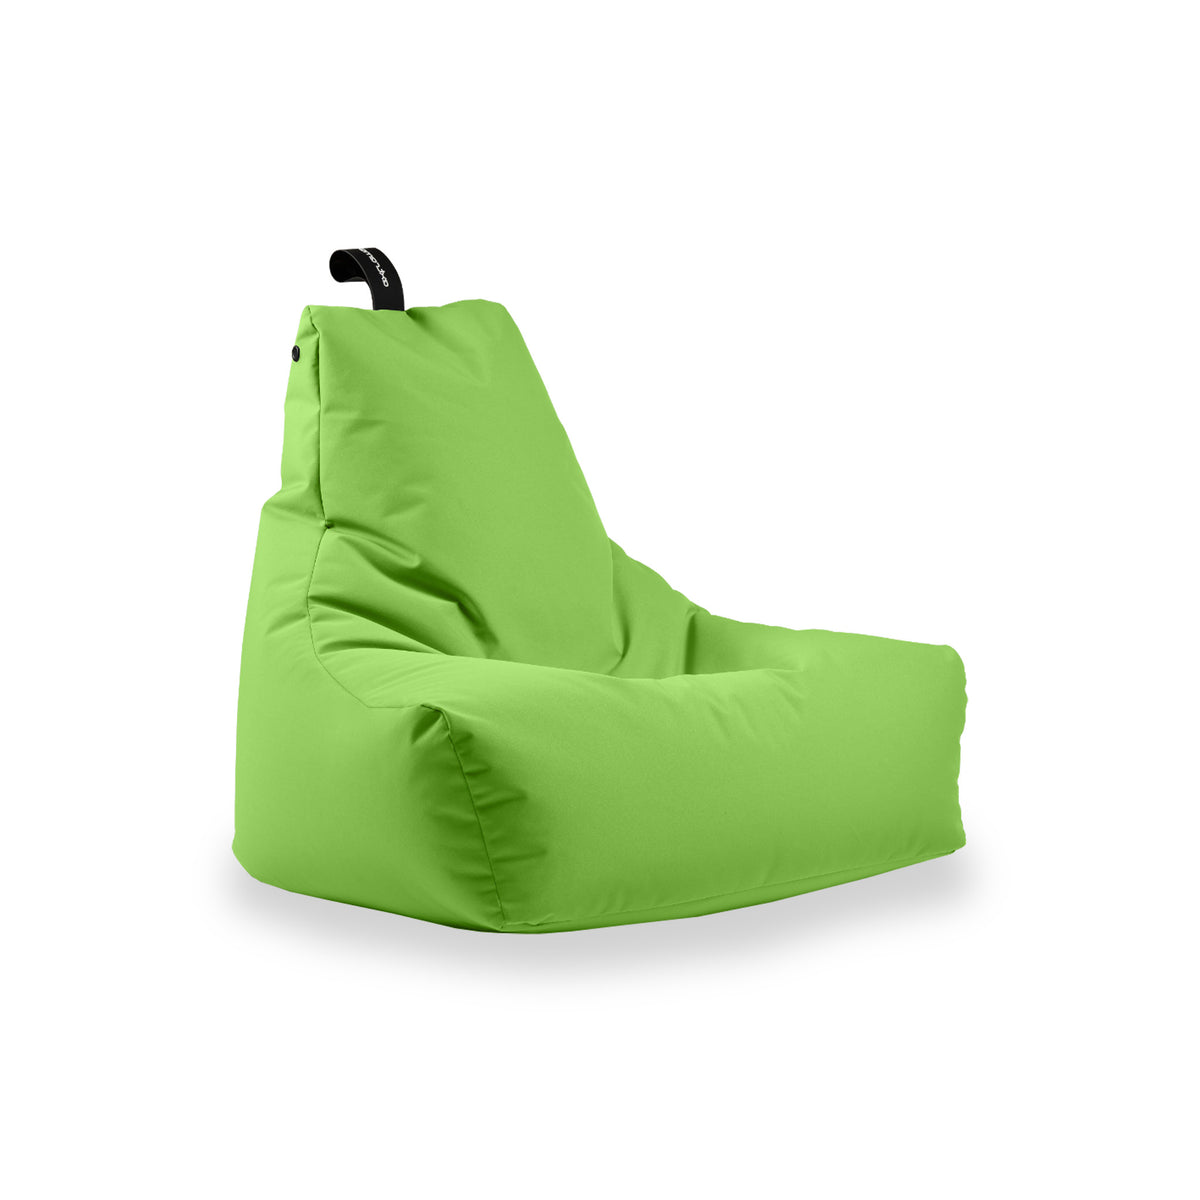 Mighty B Beanbag in Lime from Roseland Furniture